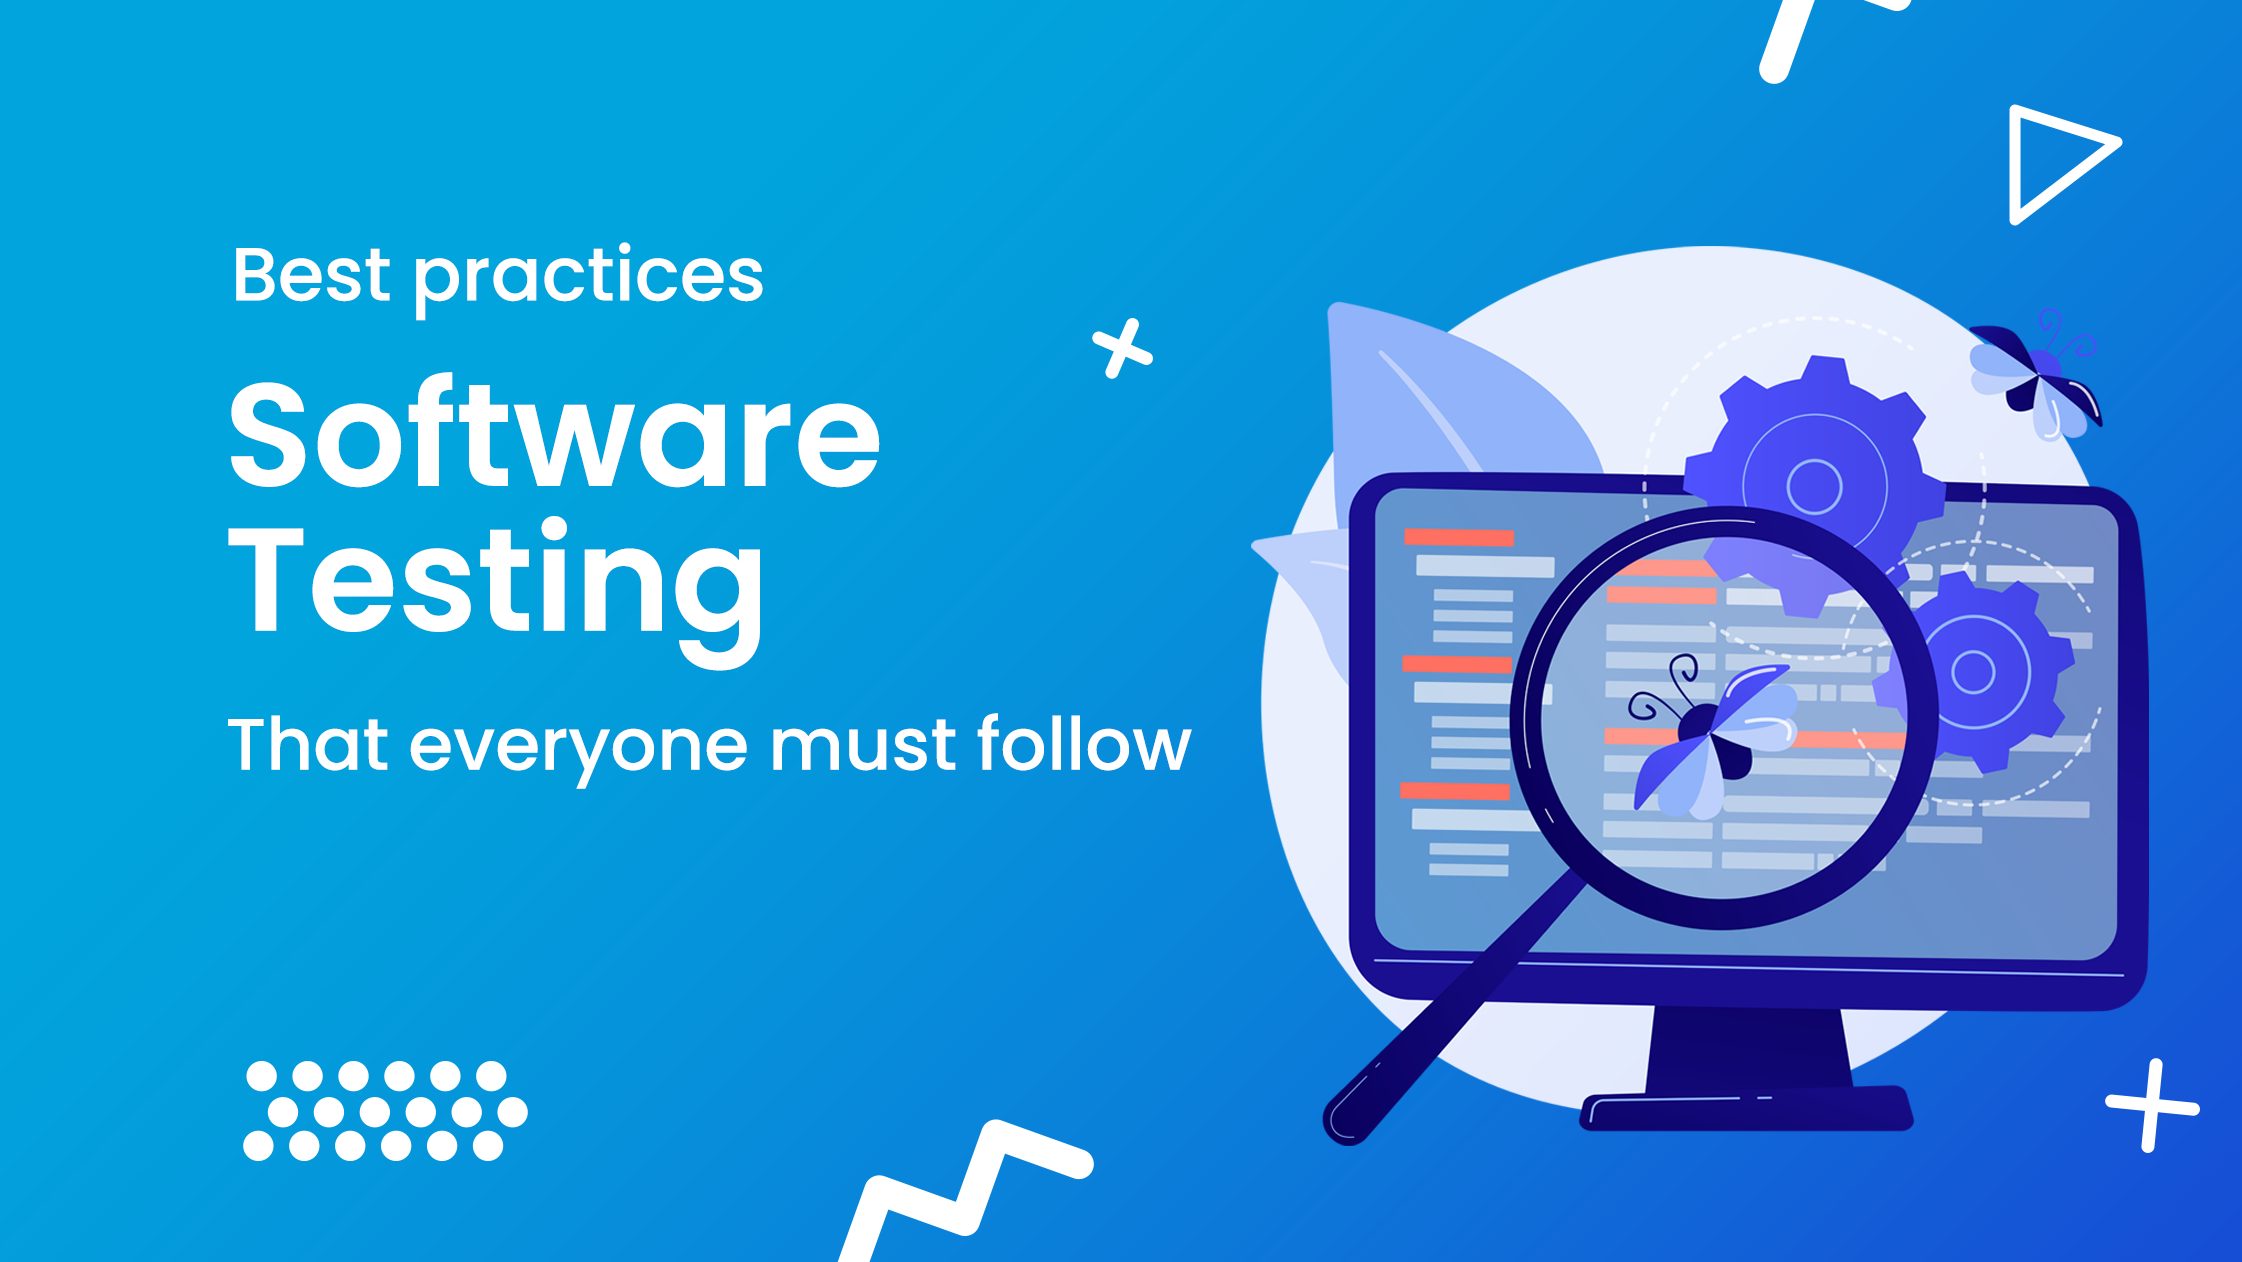 Software testing best practices